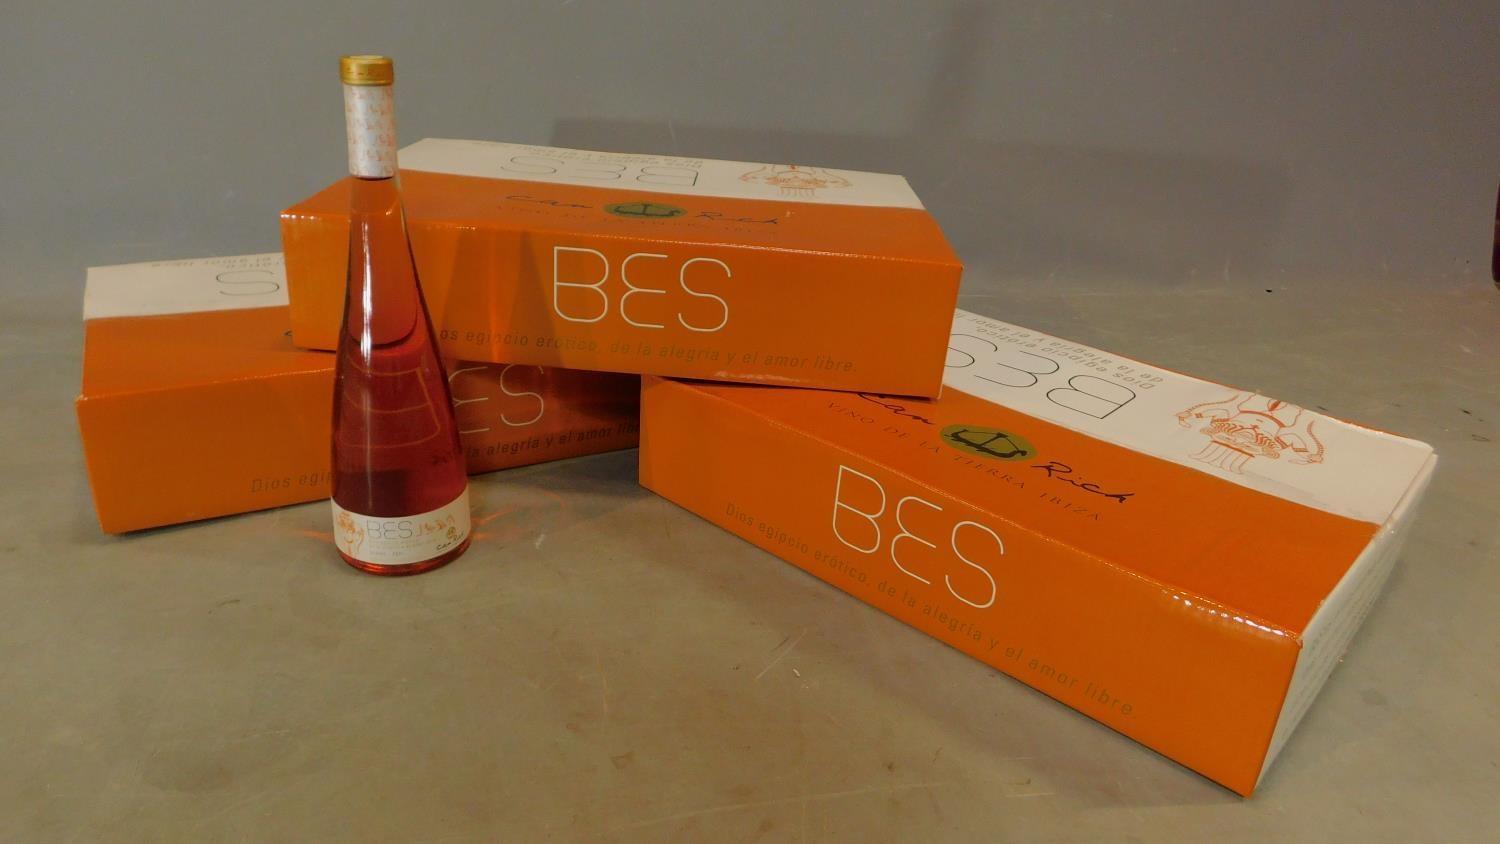 Three half case boxes of BES - Can Rich Syrah 2011 wine. (18 bottles). - Image 2 of 3